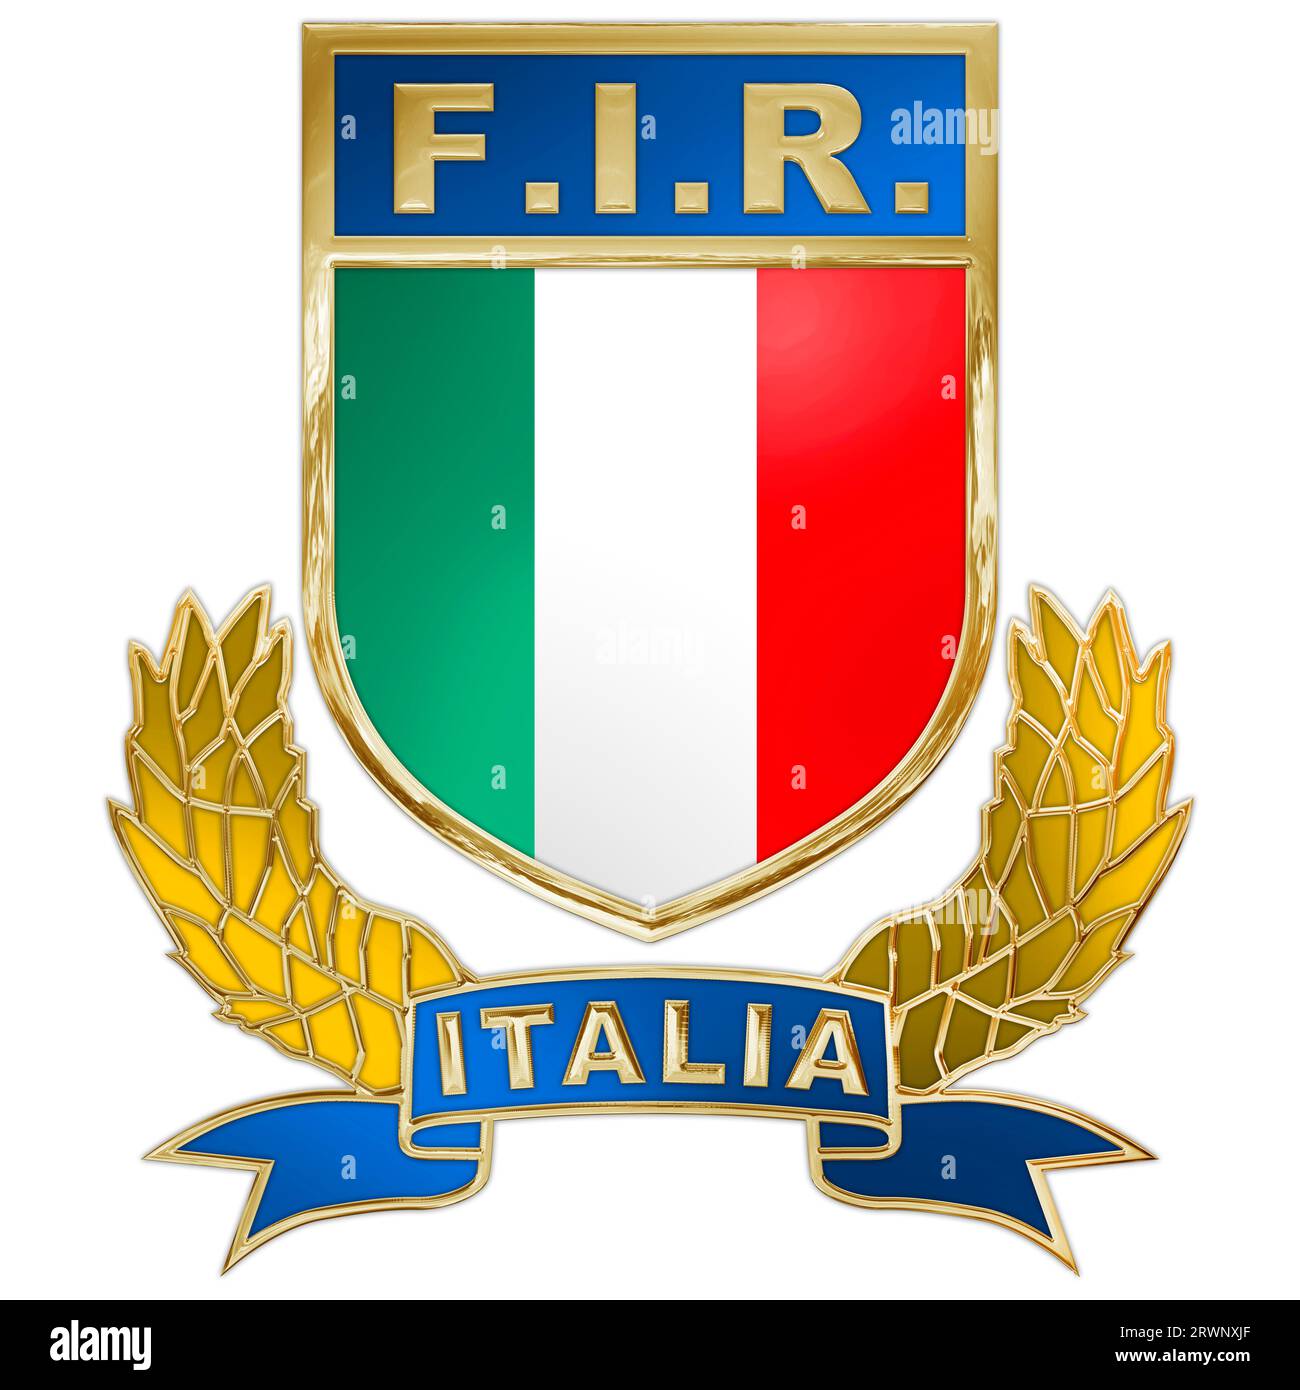 Italy, year 2023, Italian Rugby Federation, golden graphic processing of the 3D coat of arms, illustration Stock Photo